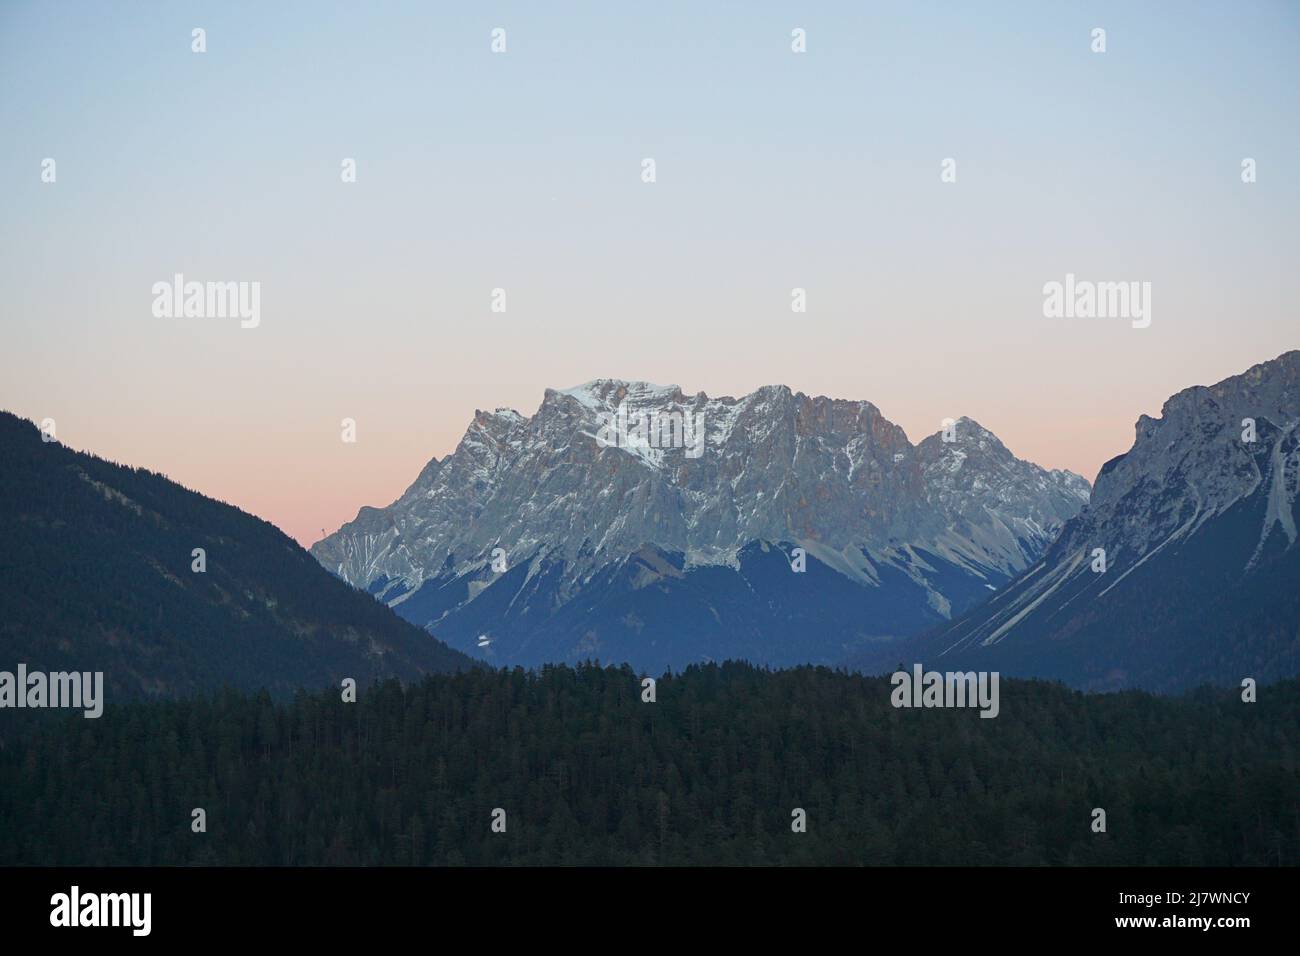 Panoramic view of the rocky Zugspitze peak, with forest in front and beautiful sunset sky in the back, shot in December Stock Photo